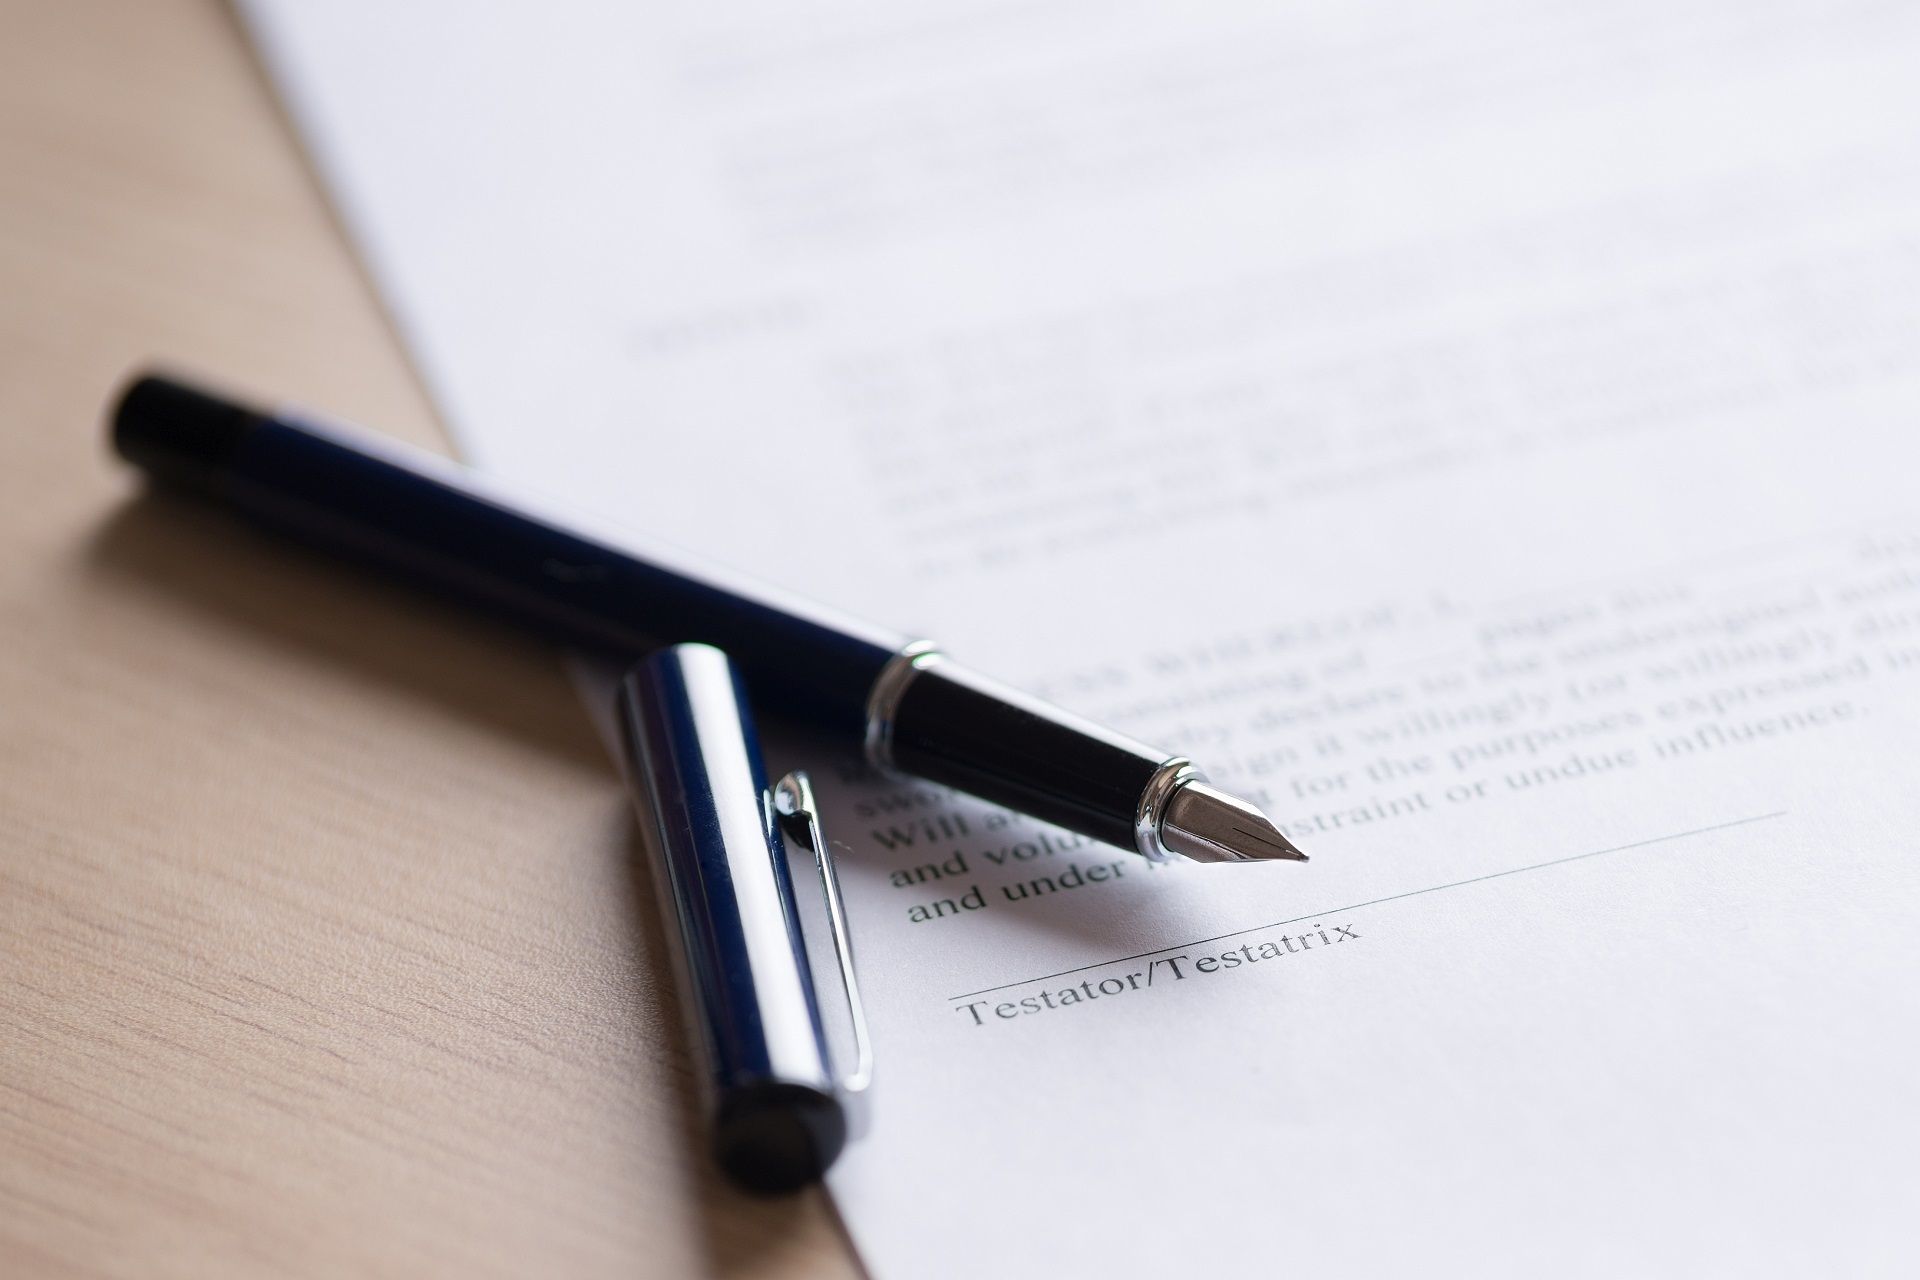 How To Change The Executor Of A Will?